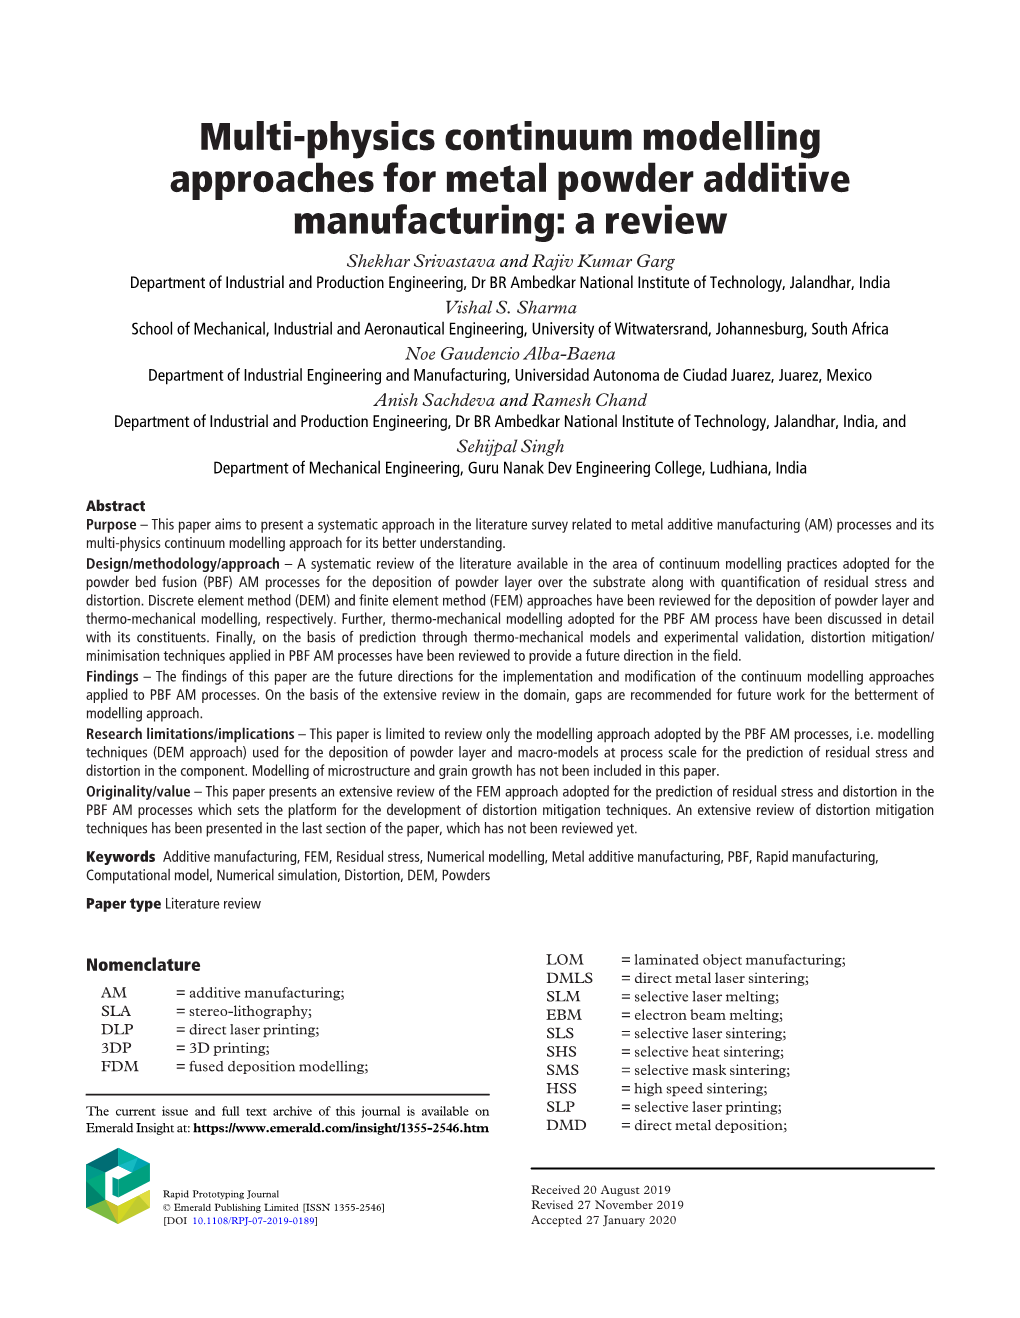 Multi-Physics Continuum Modelling Approaches for Metal Powder Additive Manufacturing